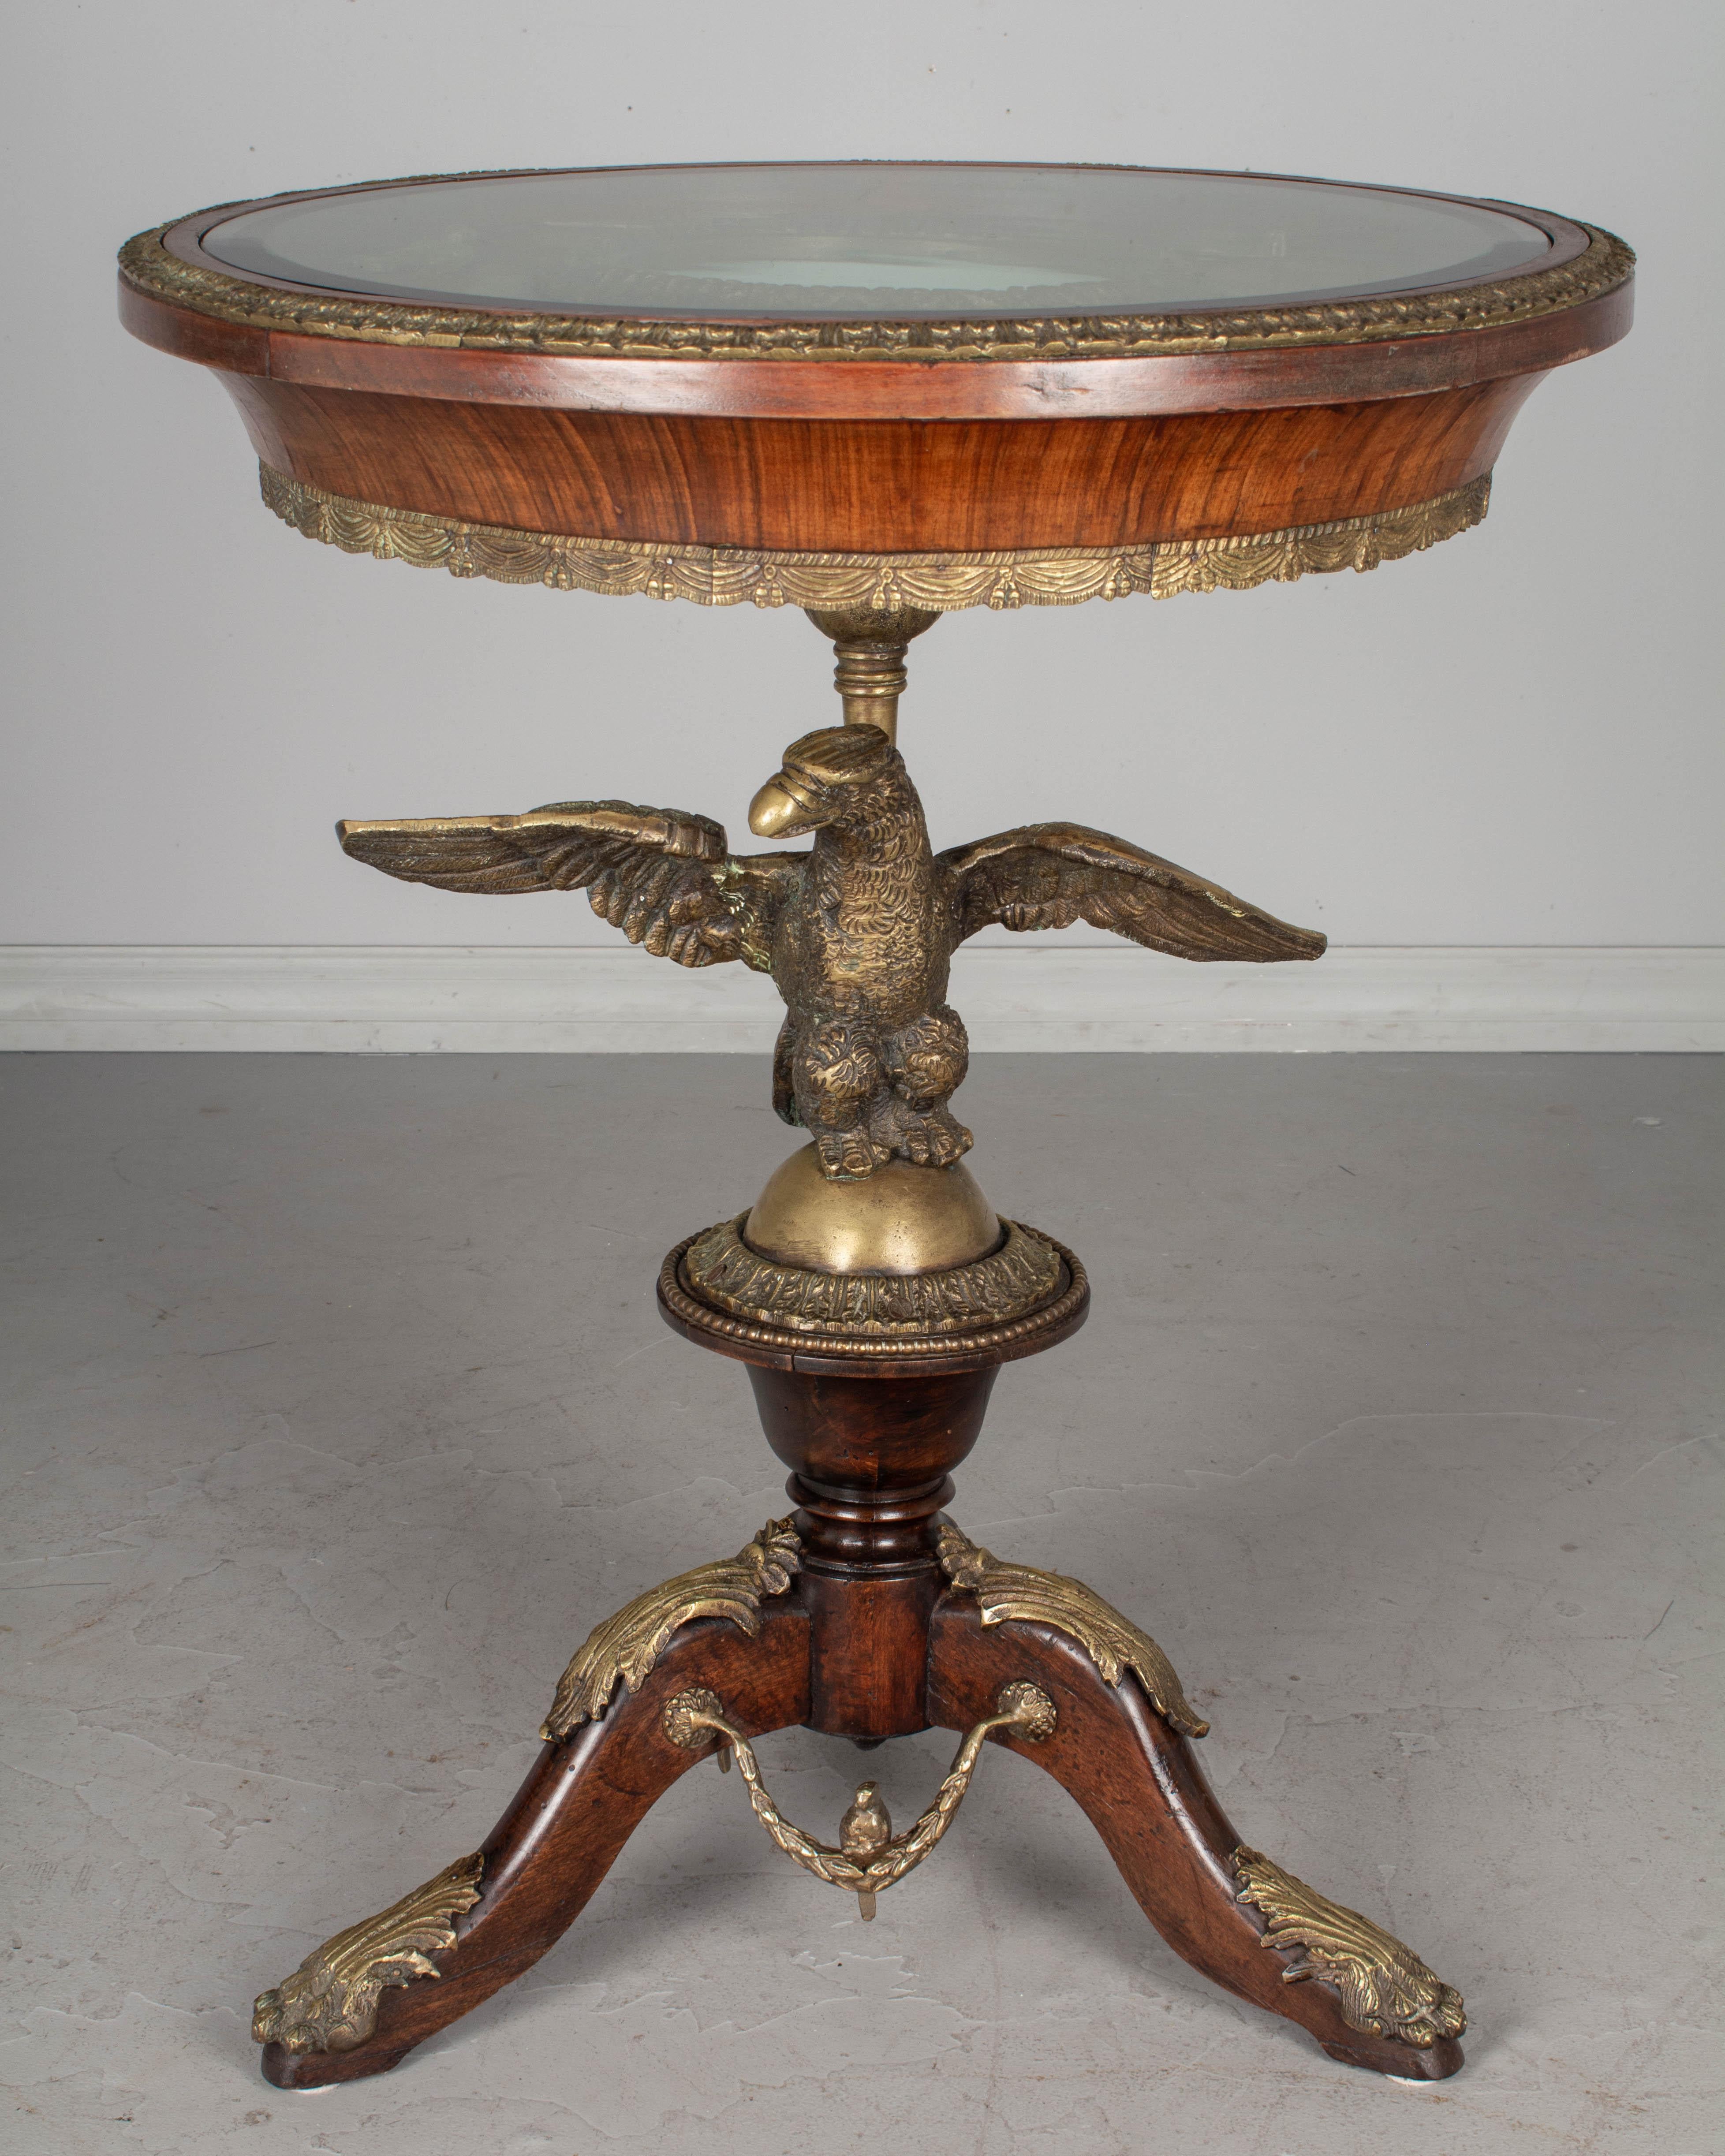 A French Louis XV style bronze mounted guéridon with a large cast bronze eagle perched on an orb in the center of the tripod pedestal base. The circular top has a hand painted Sèvres style porcelain plaque with romantic pastoral scene, signed E.